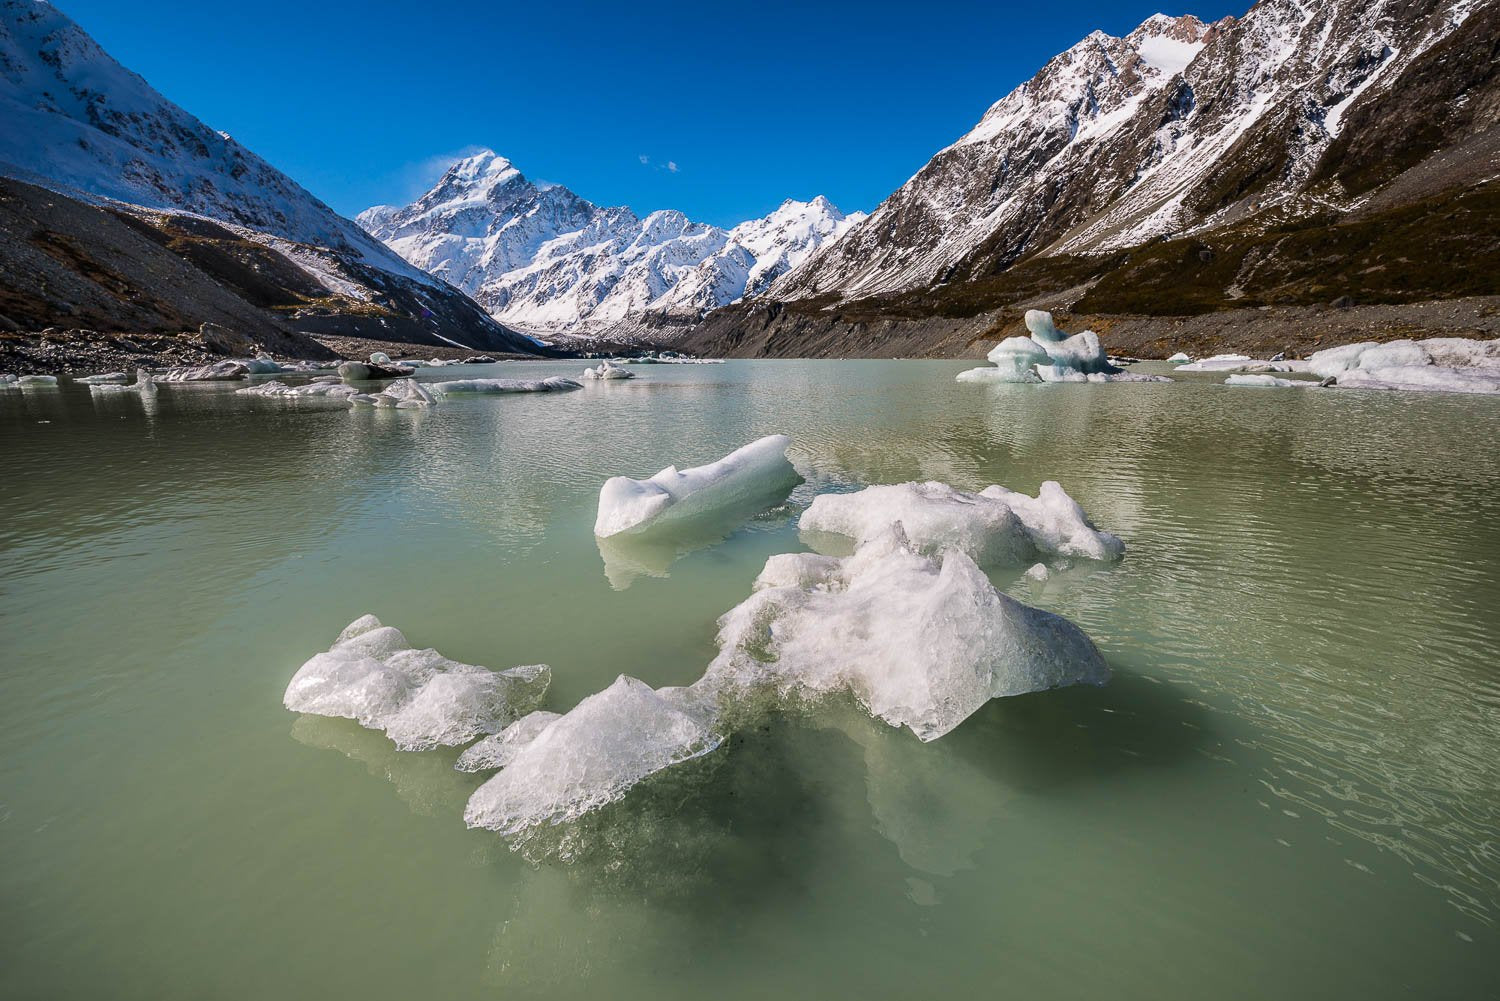 Big frozen pieces of ice in a lake, New Zealand #29